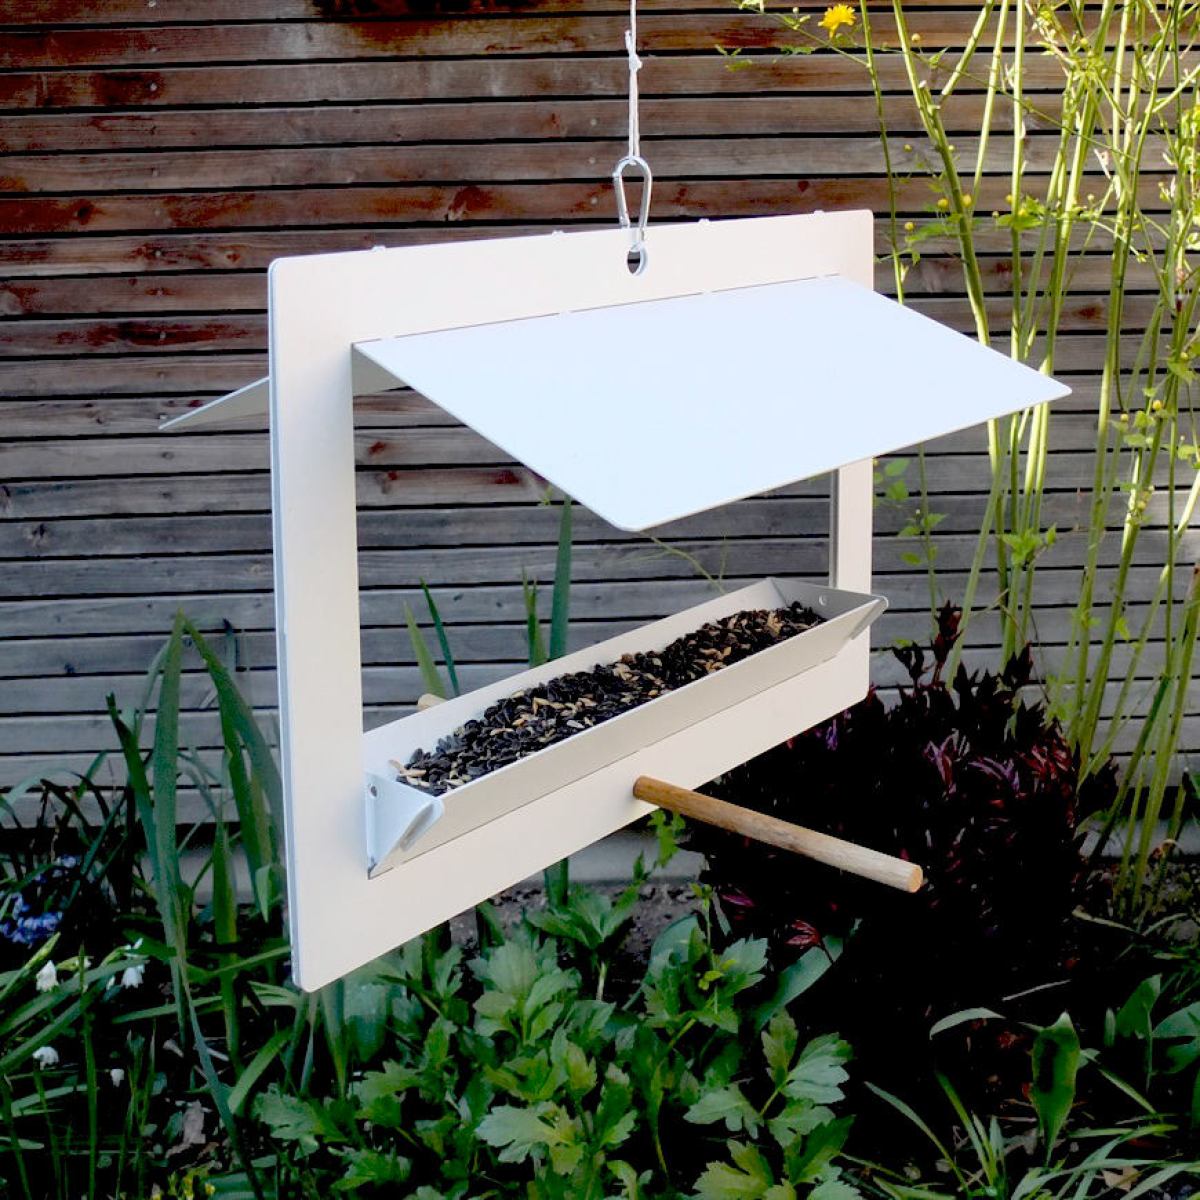 Folded Bird Feeding Station made of Steel in A3 Size